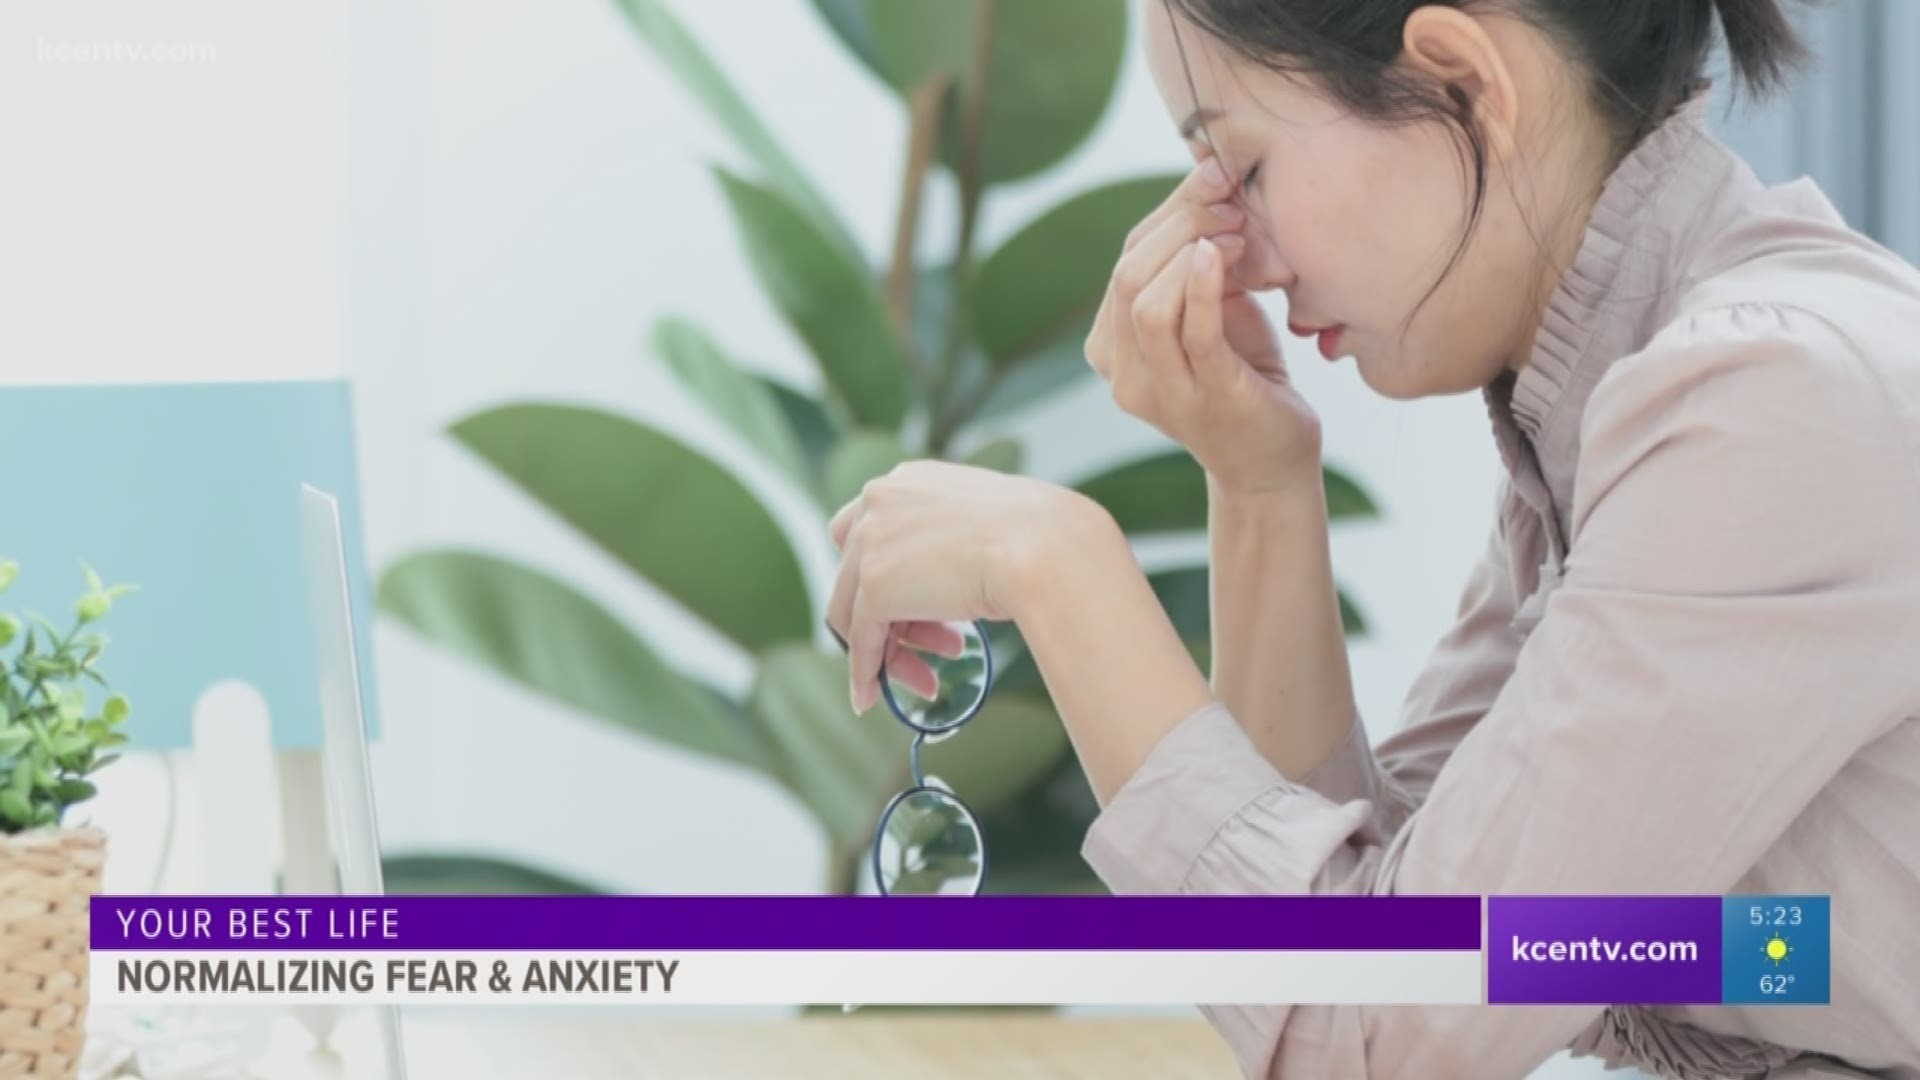 The circumstances everyone is working and living under right now can cause fear and anxiety. 6 News evening anchor spoke with a clinical social worker on how to cope